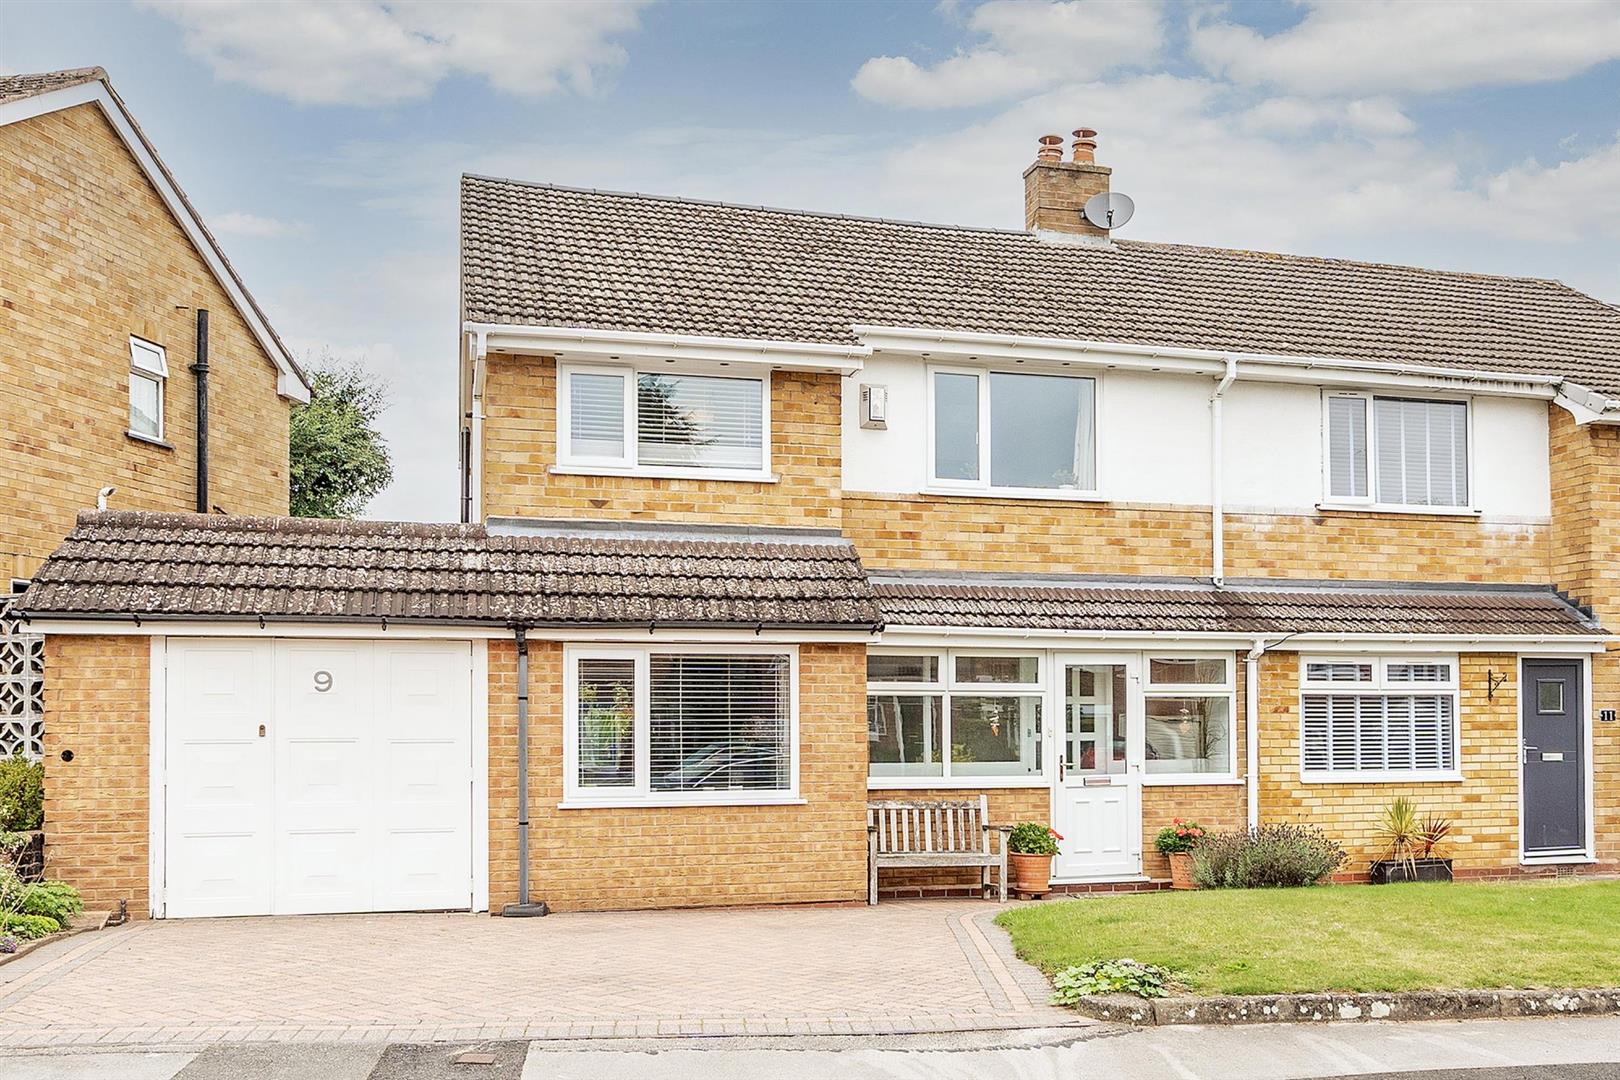 3 bed  for sale in Chantry Heath Crescent, Knowle, B93 